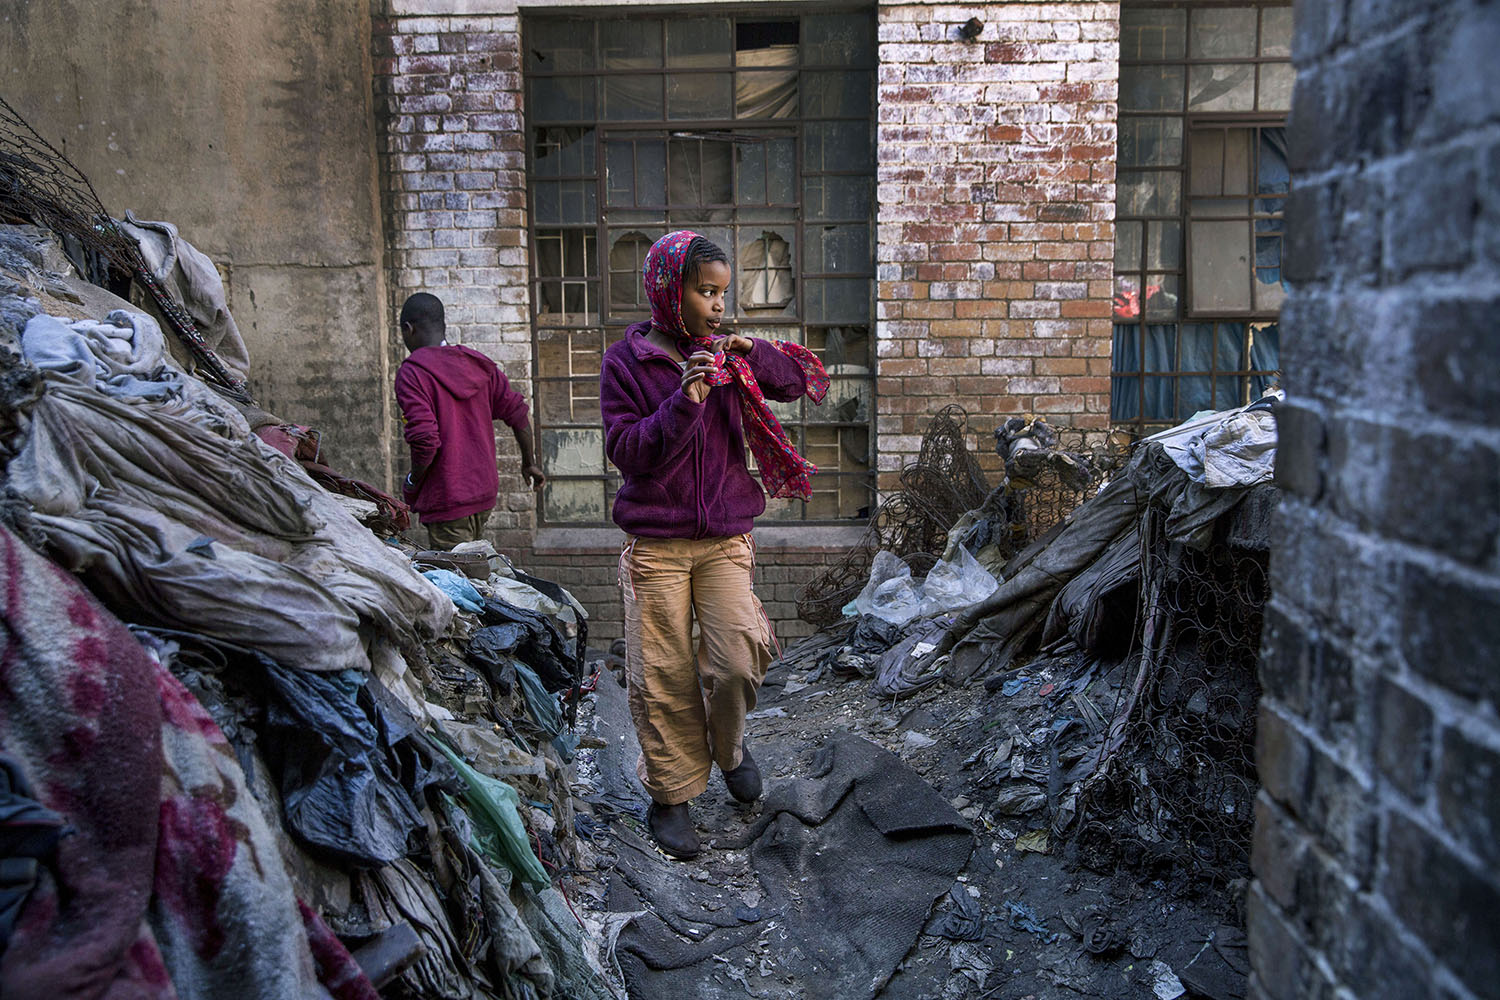 A young girl walks in a rubbish filled courtyard, July 19, 2015.